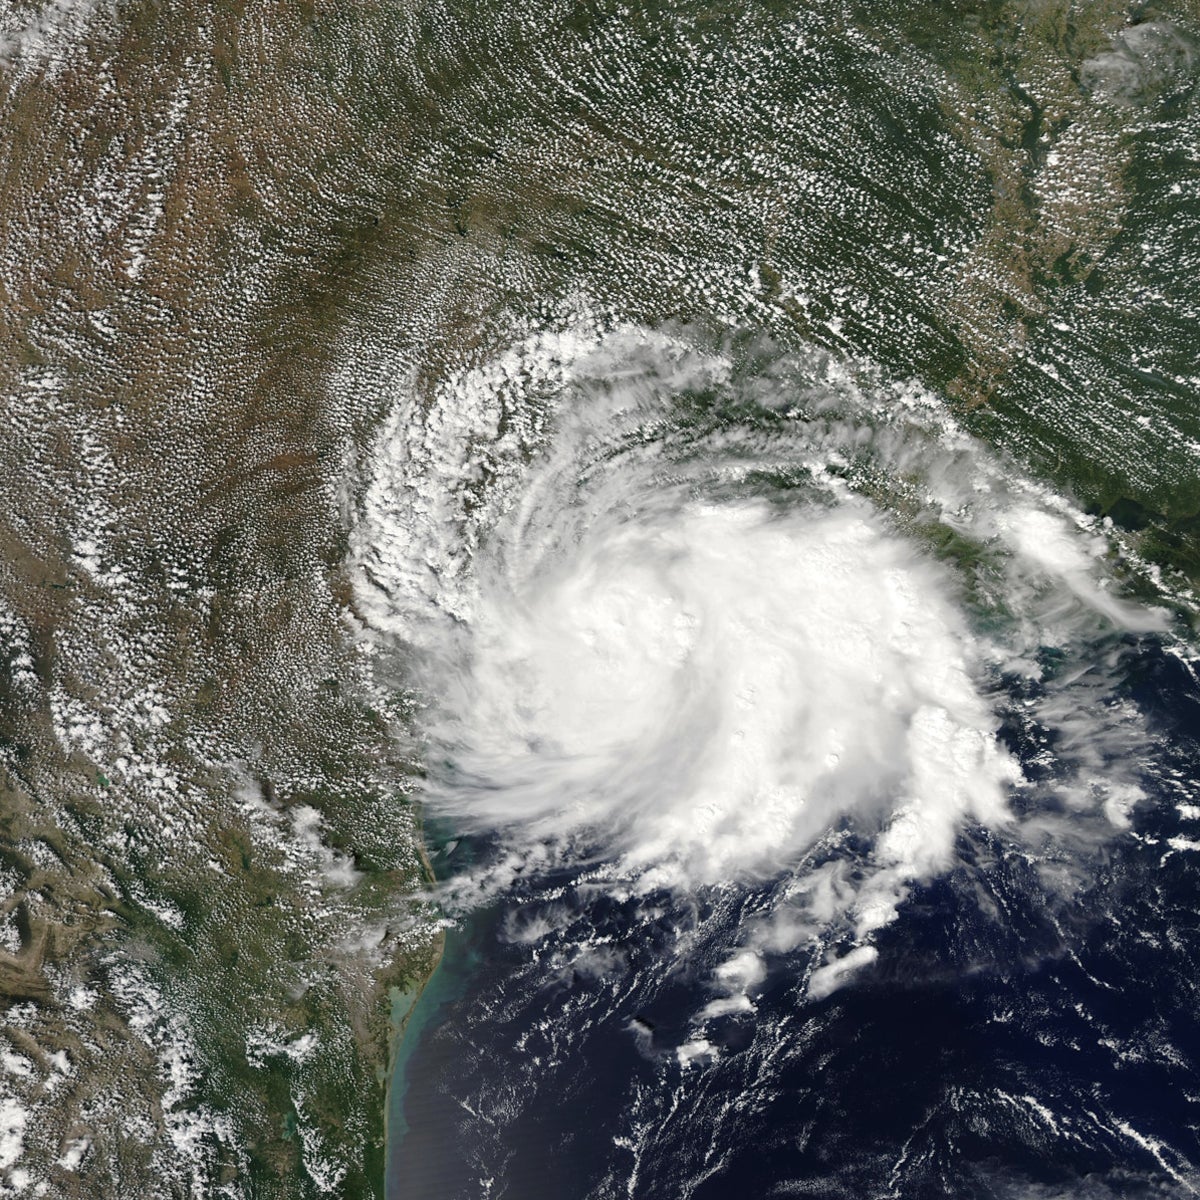 Tropical Storm Imelda over Texas where it caused severe flooding. Operation Blessing is sending relief.